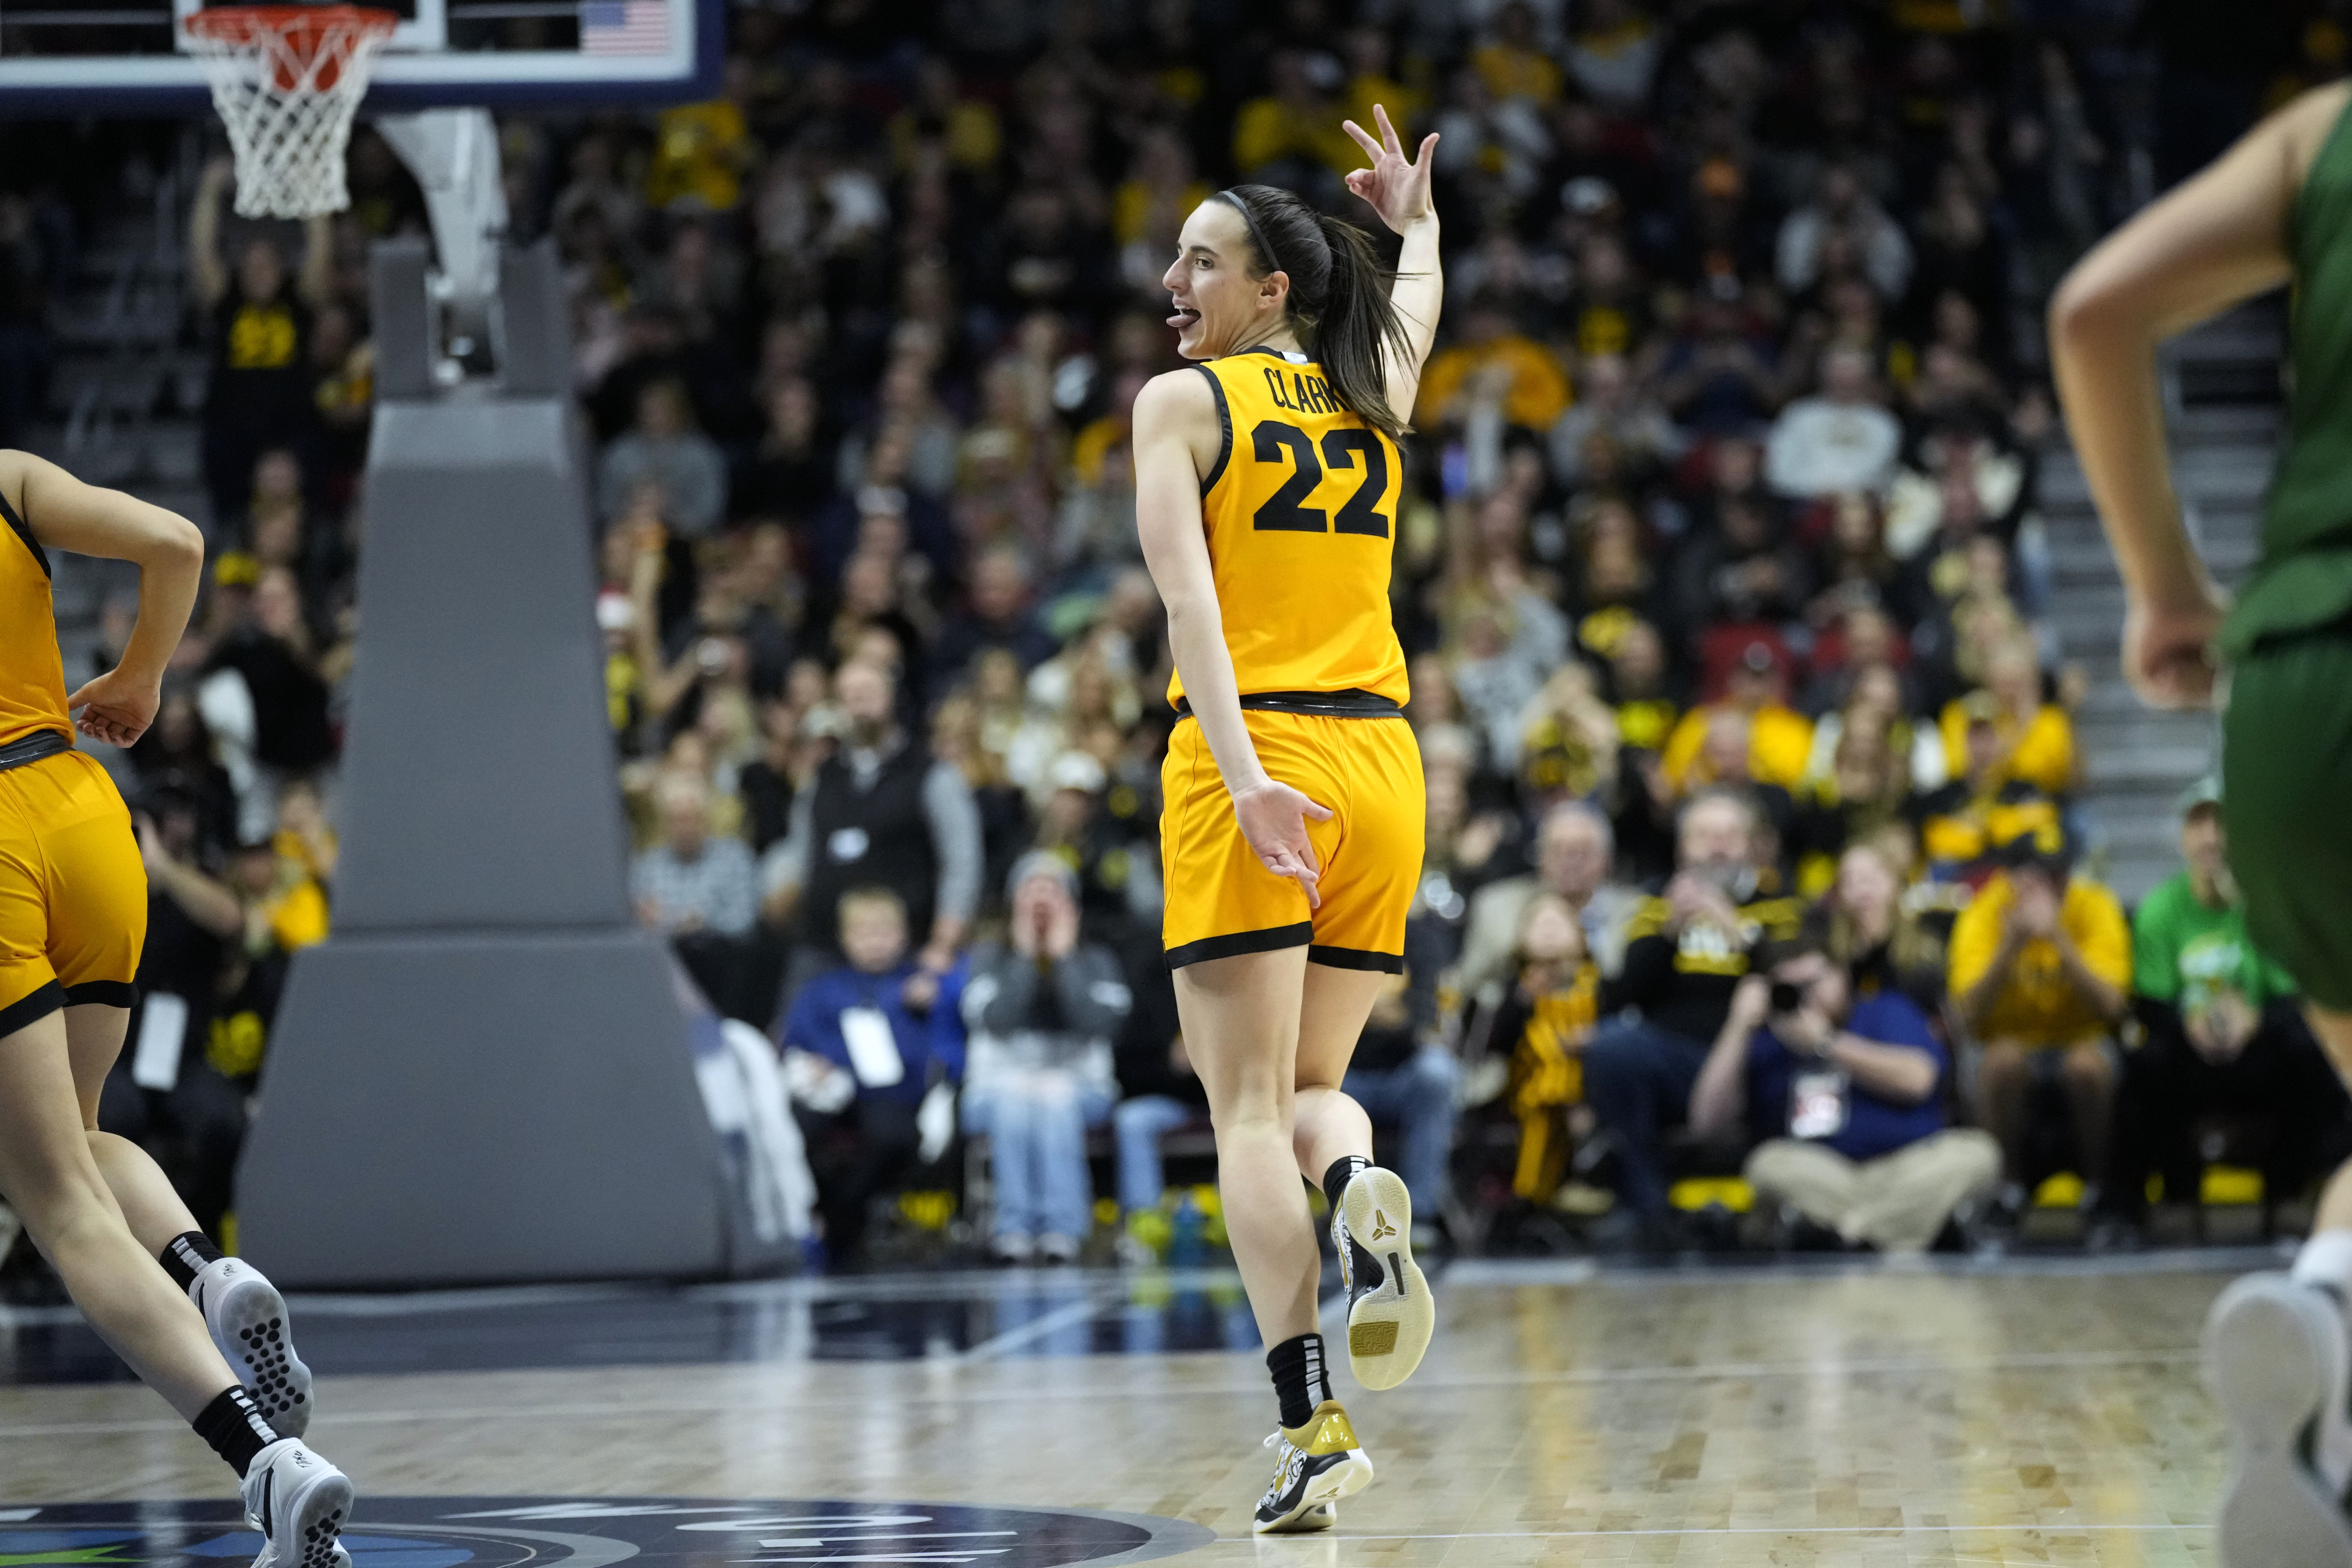 Caitlin Clark's 38 points leads No. 4 Iowa over Cleveland State 104-75